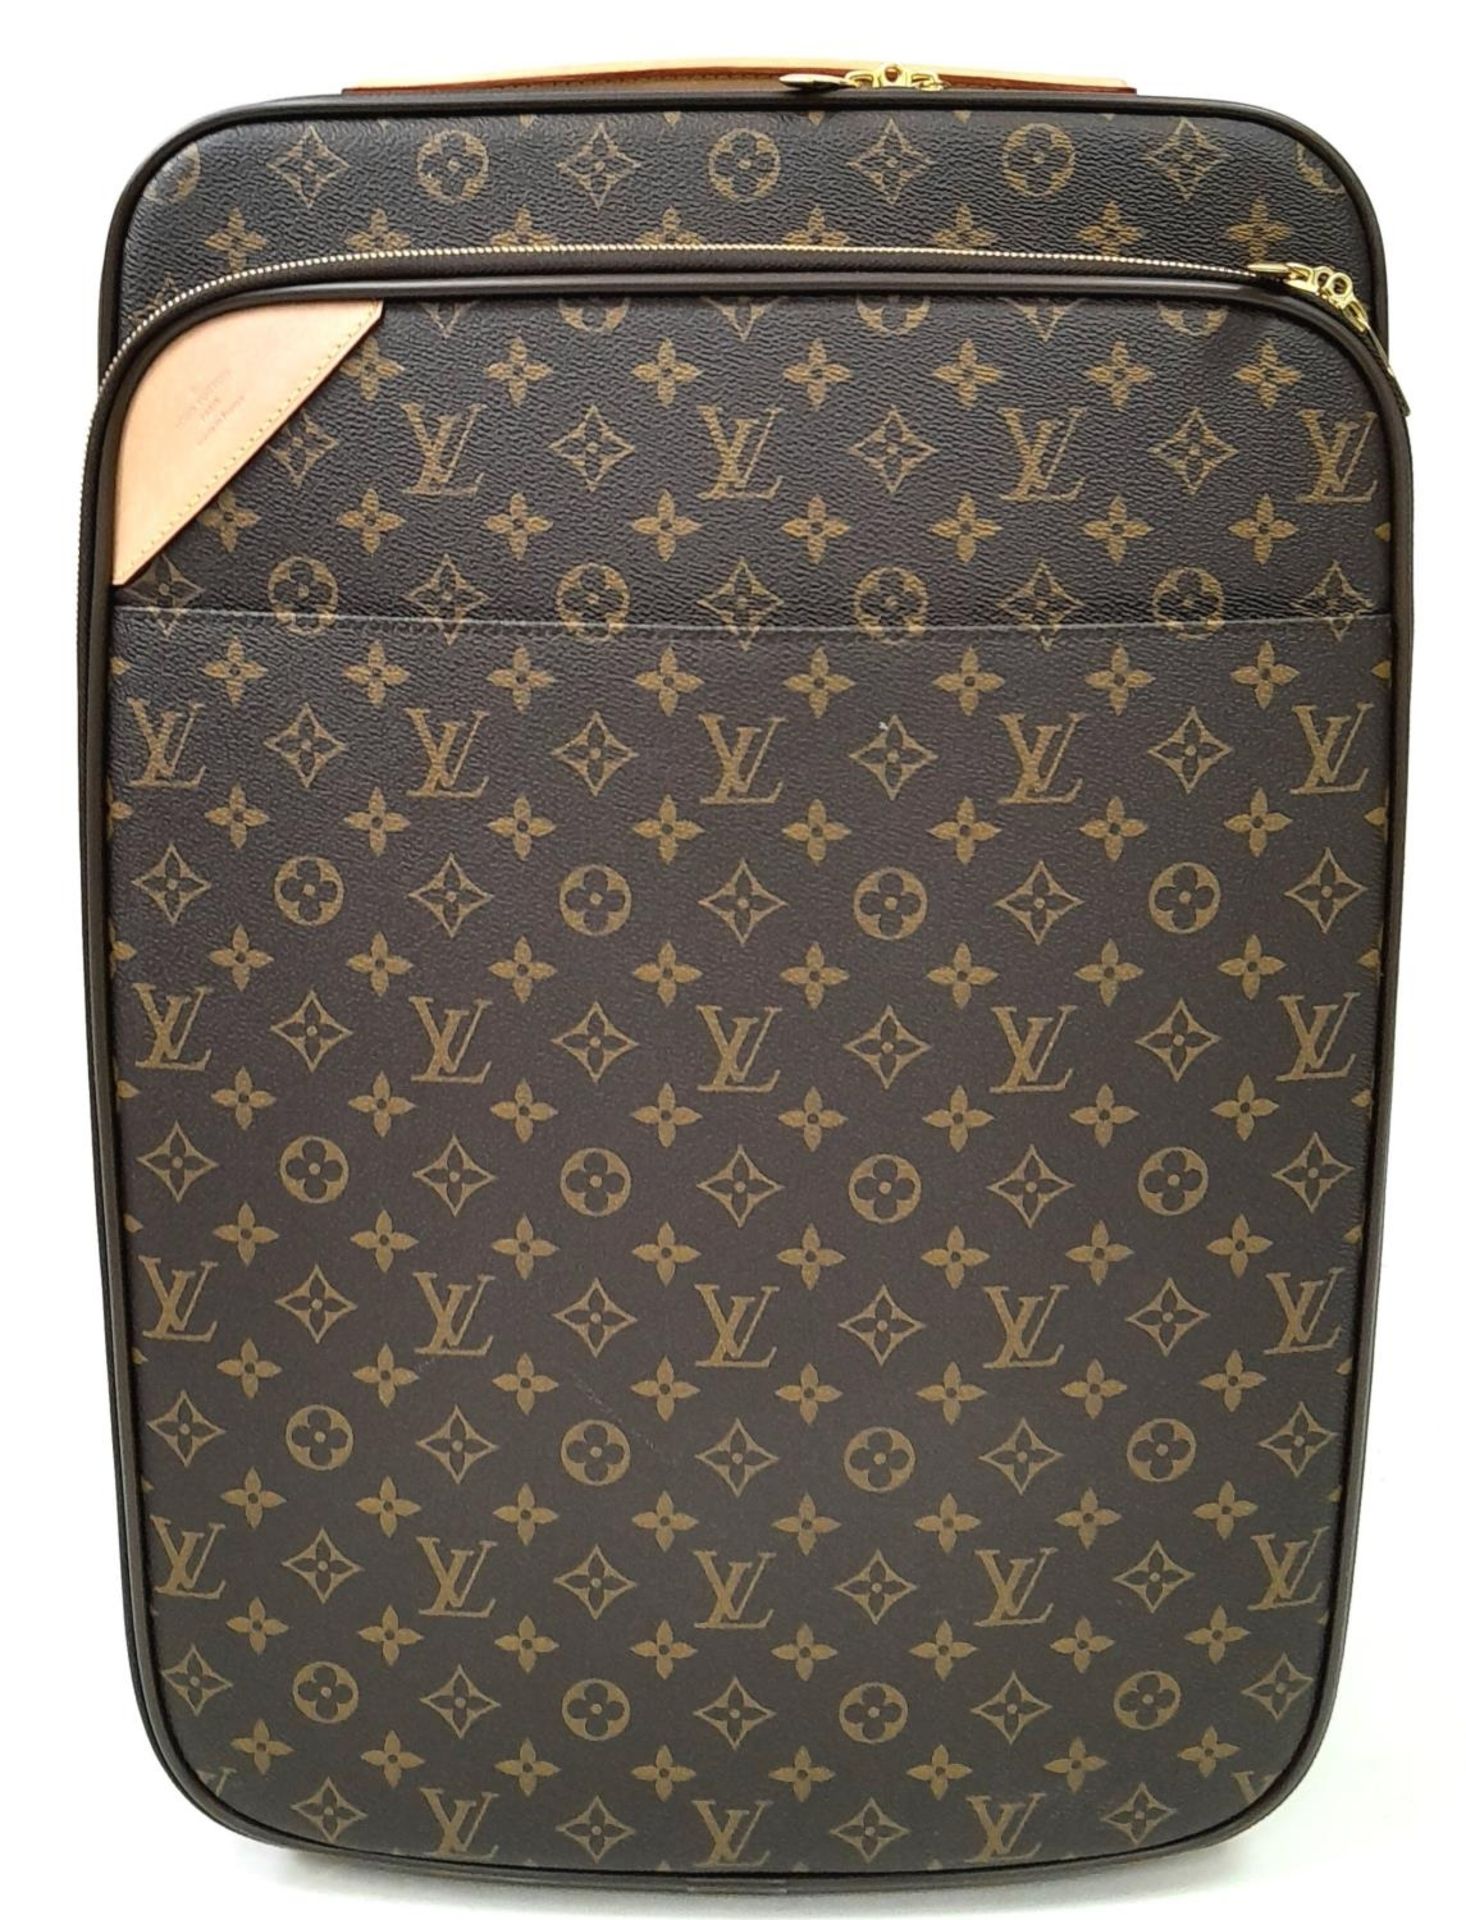 A Louis Vuitton Monogram Pegase Suitcase. Durable leather exterior with gold-toned hardware. Front